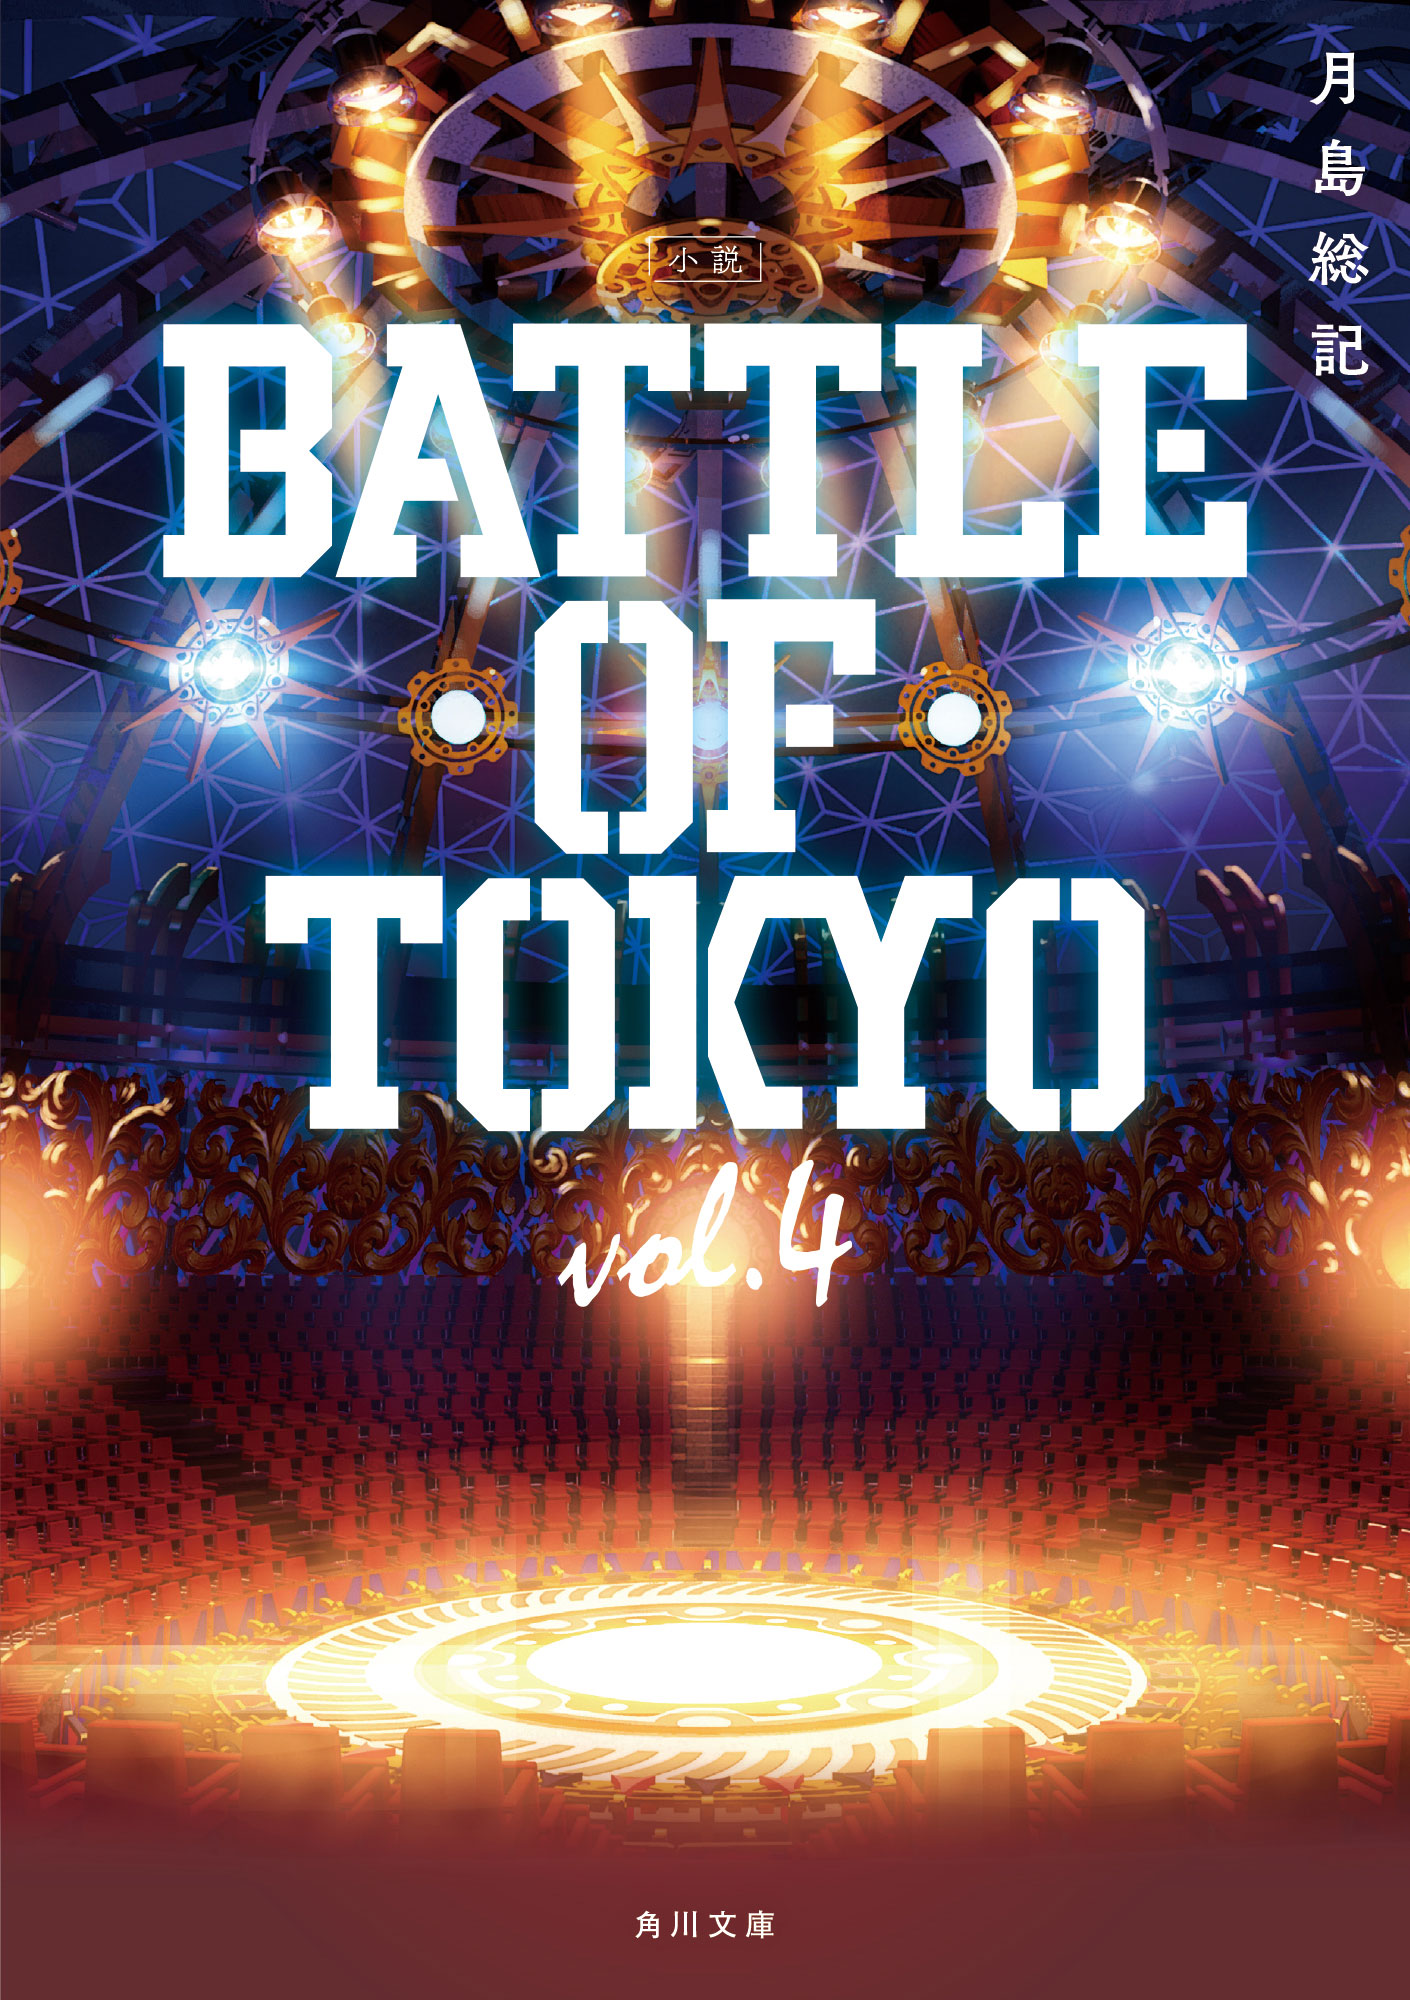 【BATTLE OF TOKYO】闘争と狂騒の宴が、いま始まる―― 角川文庫『小説 BATTLE OF TOKYO vol.4』 7月21日（木）発売決定！